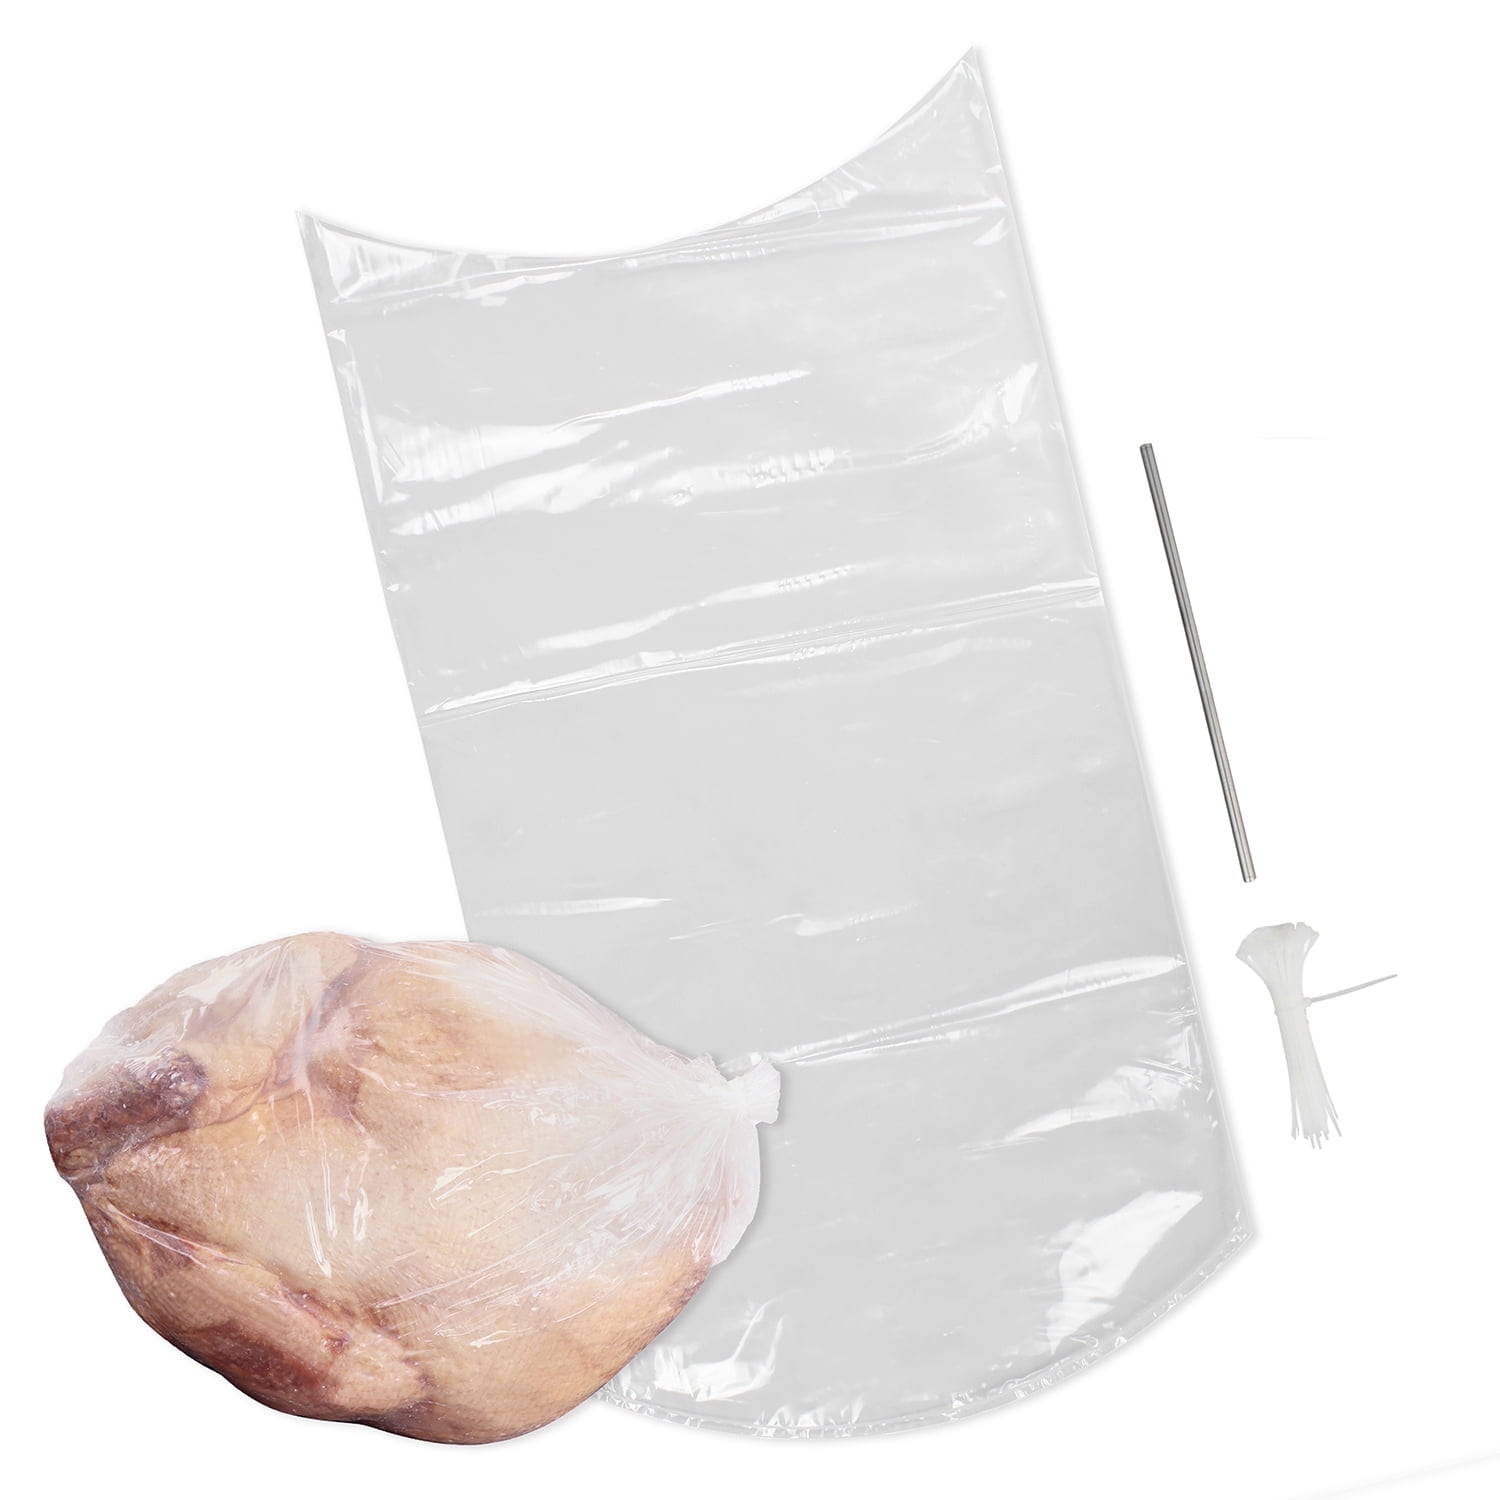 Turkey Poultry Shrink Bags,50Pcs 16x30 Inches Clear Poultry Heat